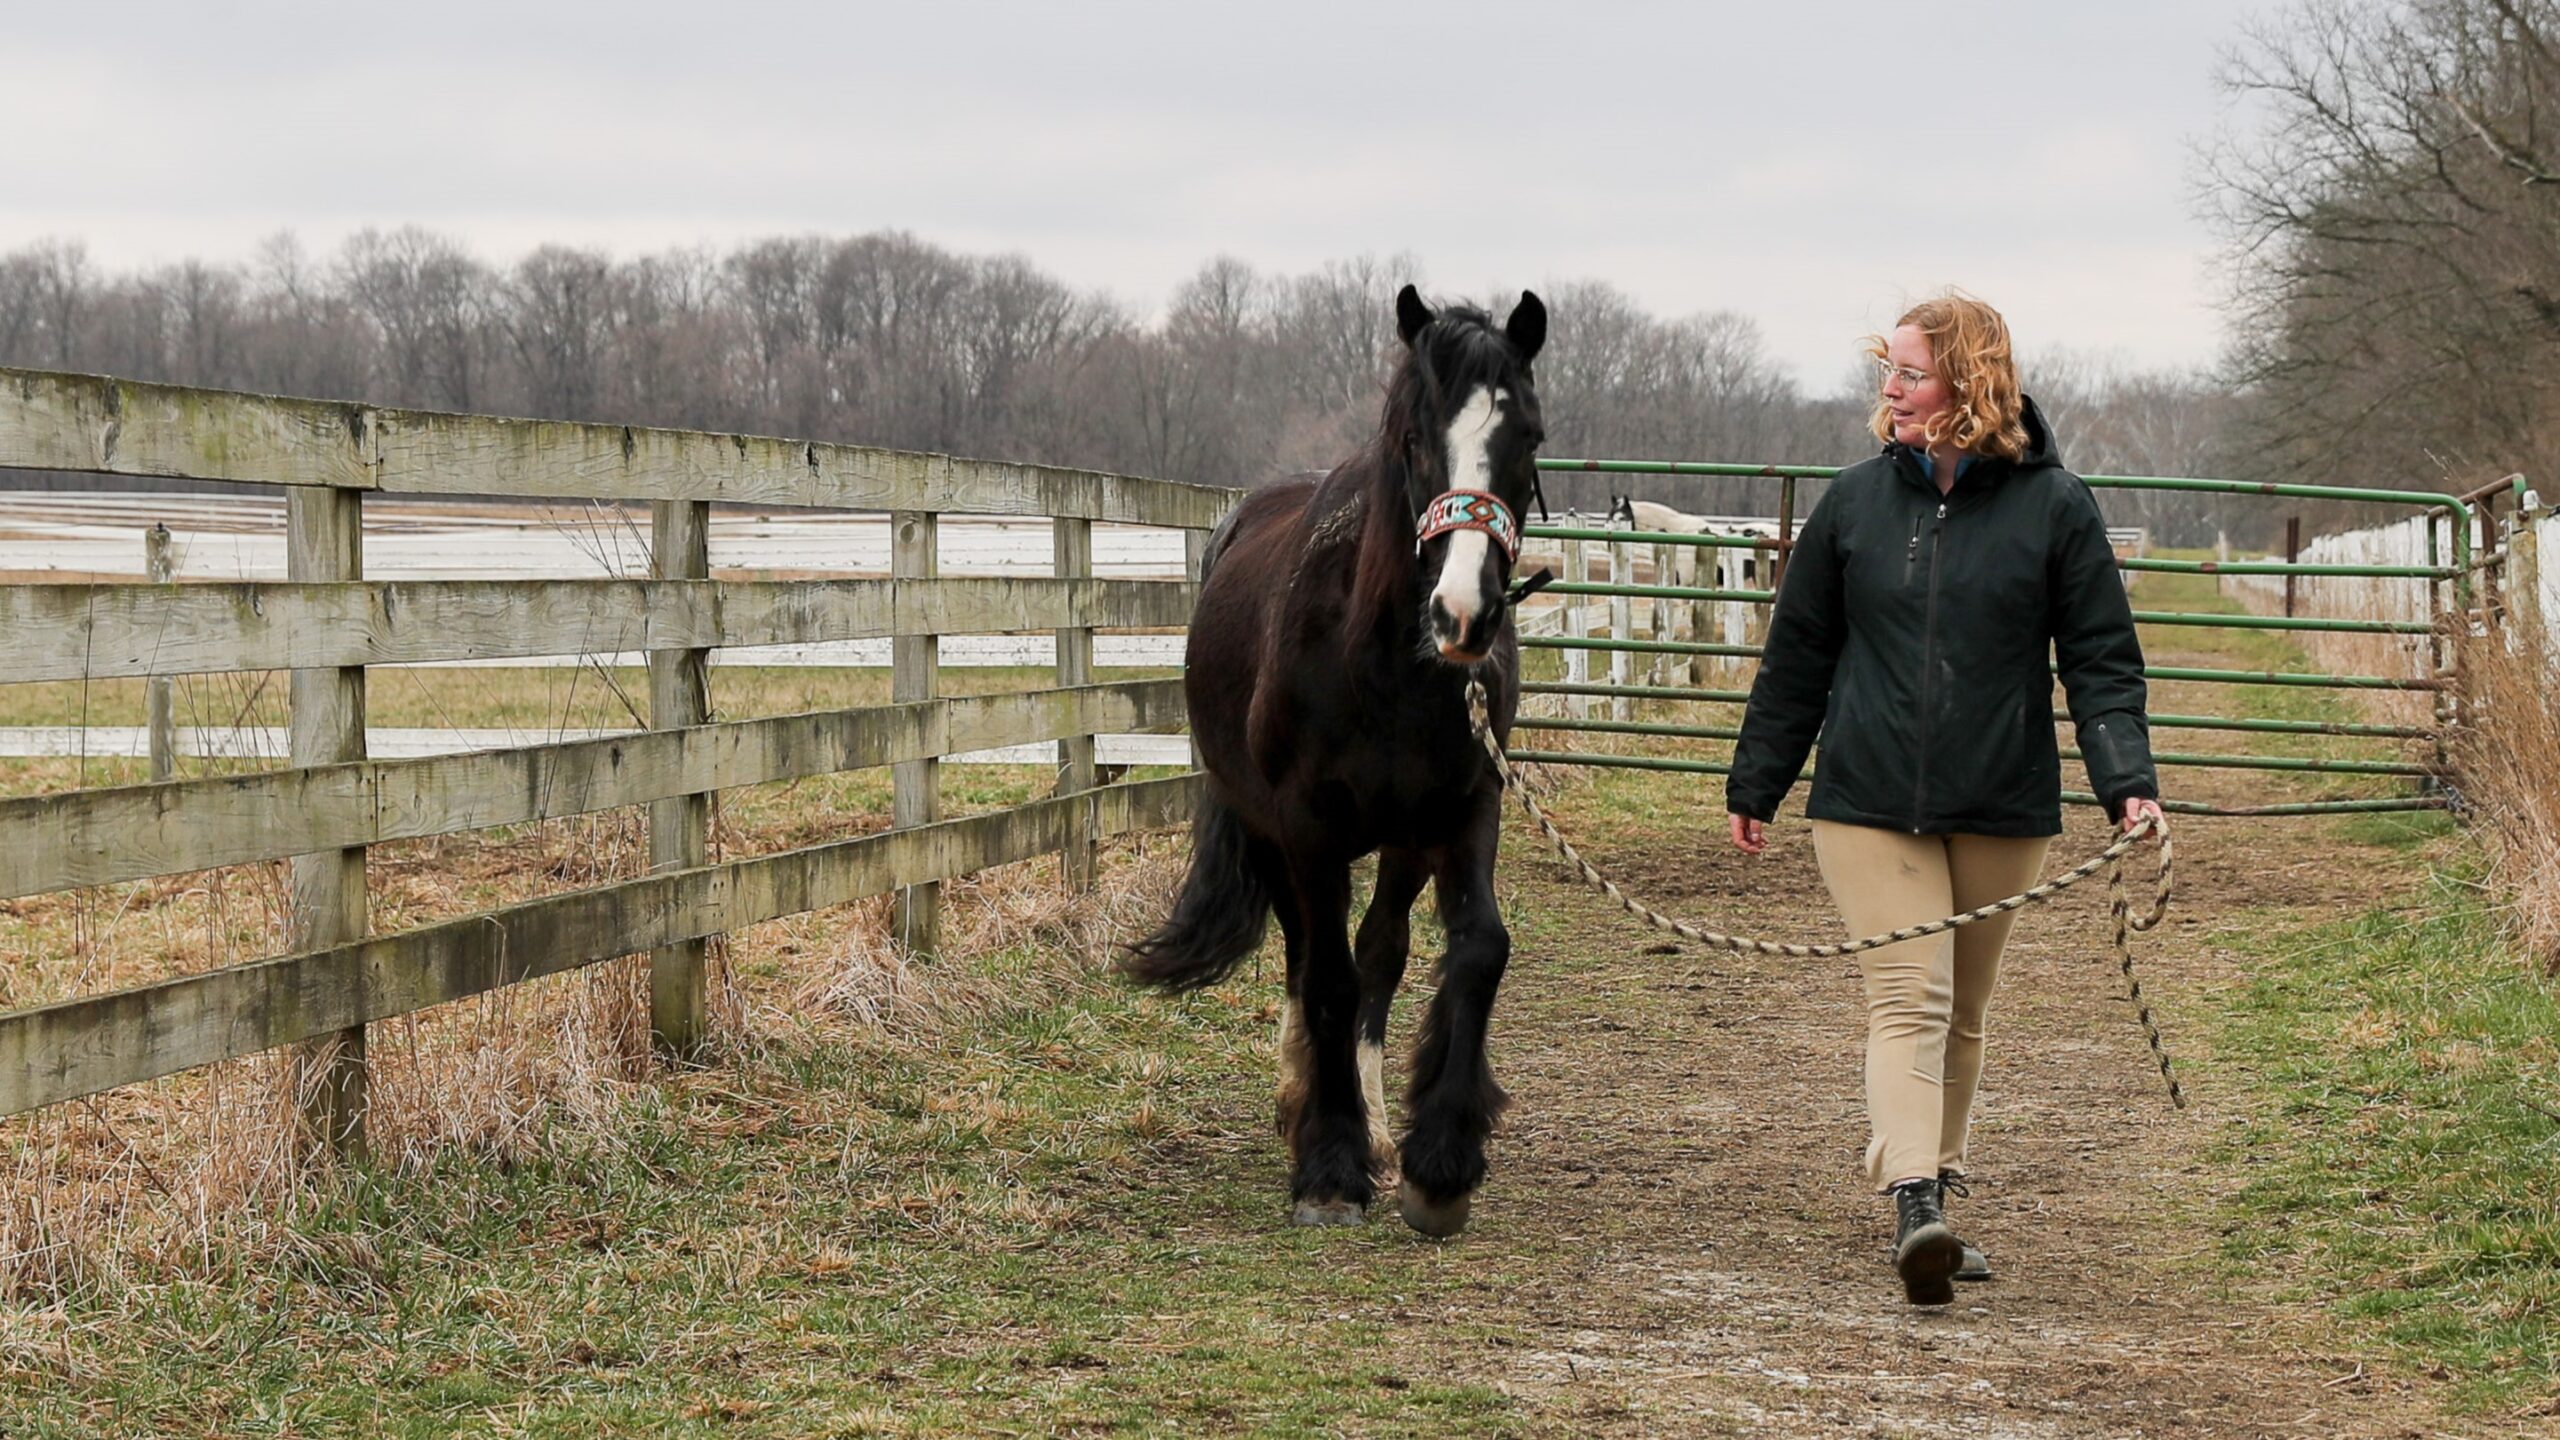 One of the horses from Earlham's Barn Co-op returns to his stable.